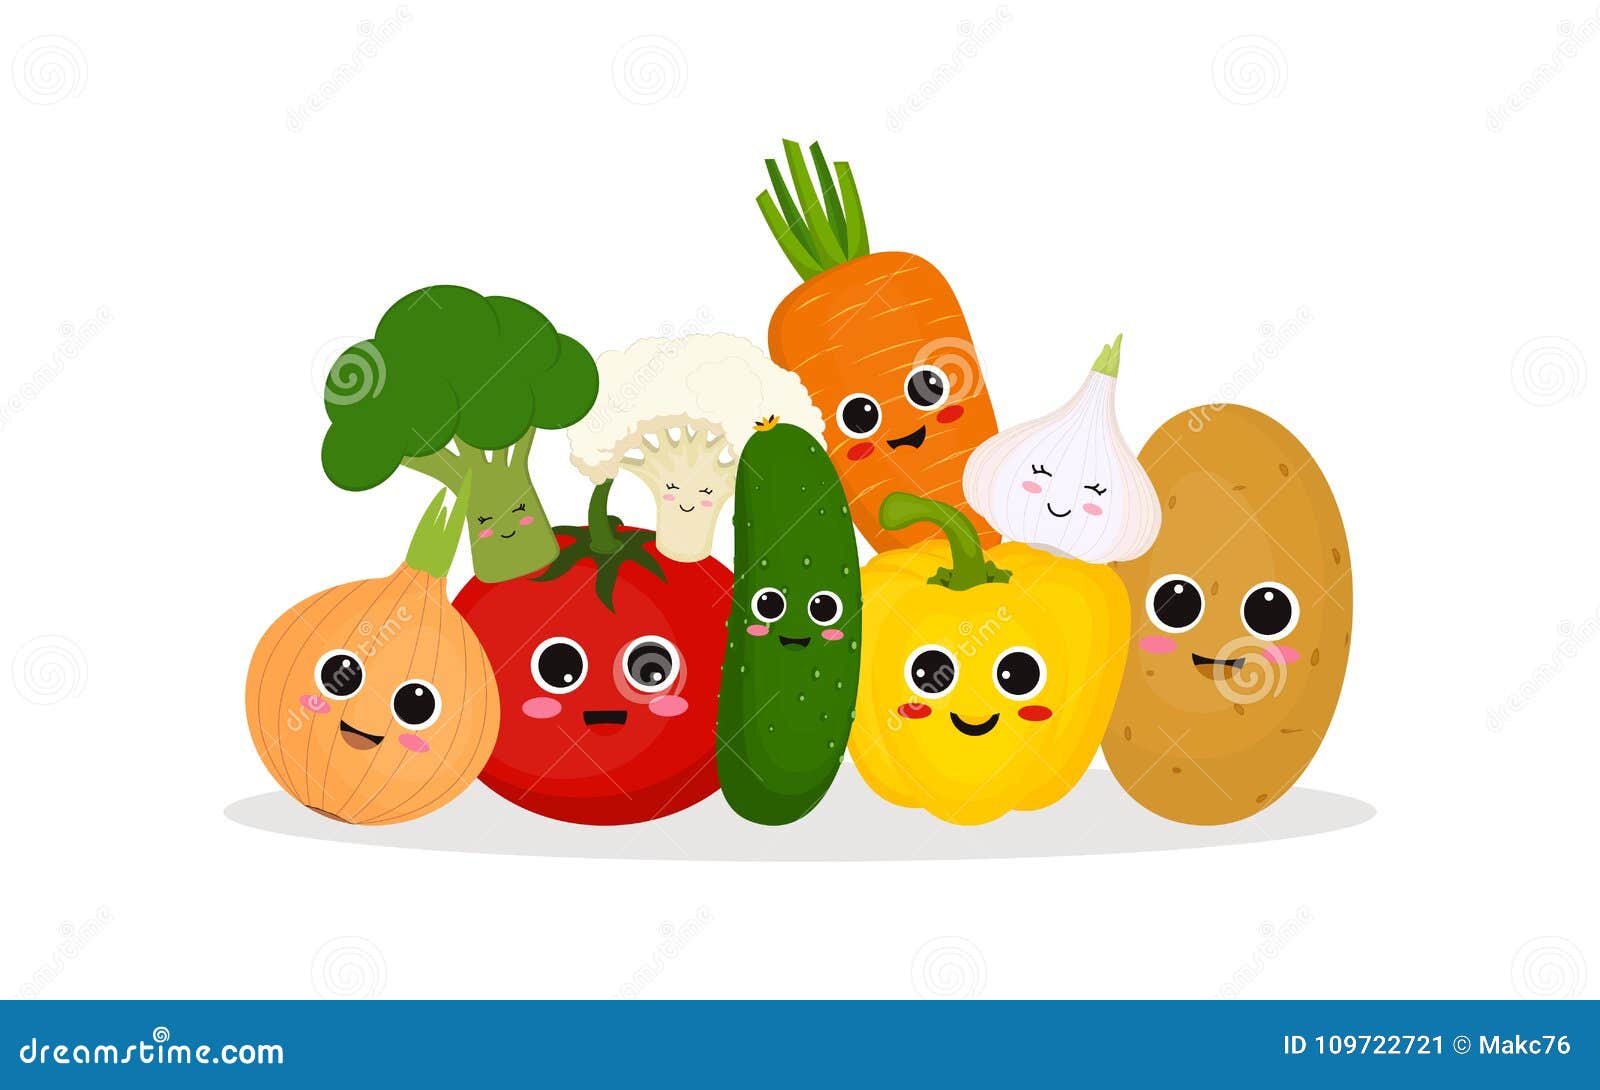 Funny and happy vegetables stock vector. Illustration of smile - 109722721